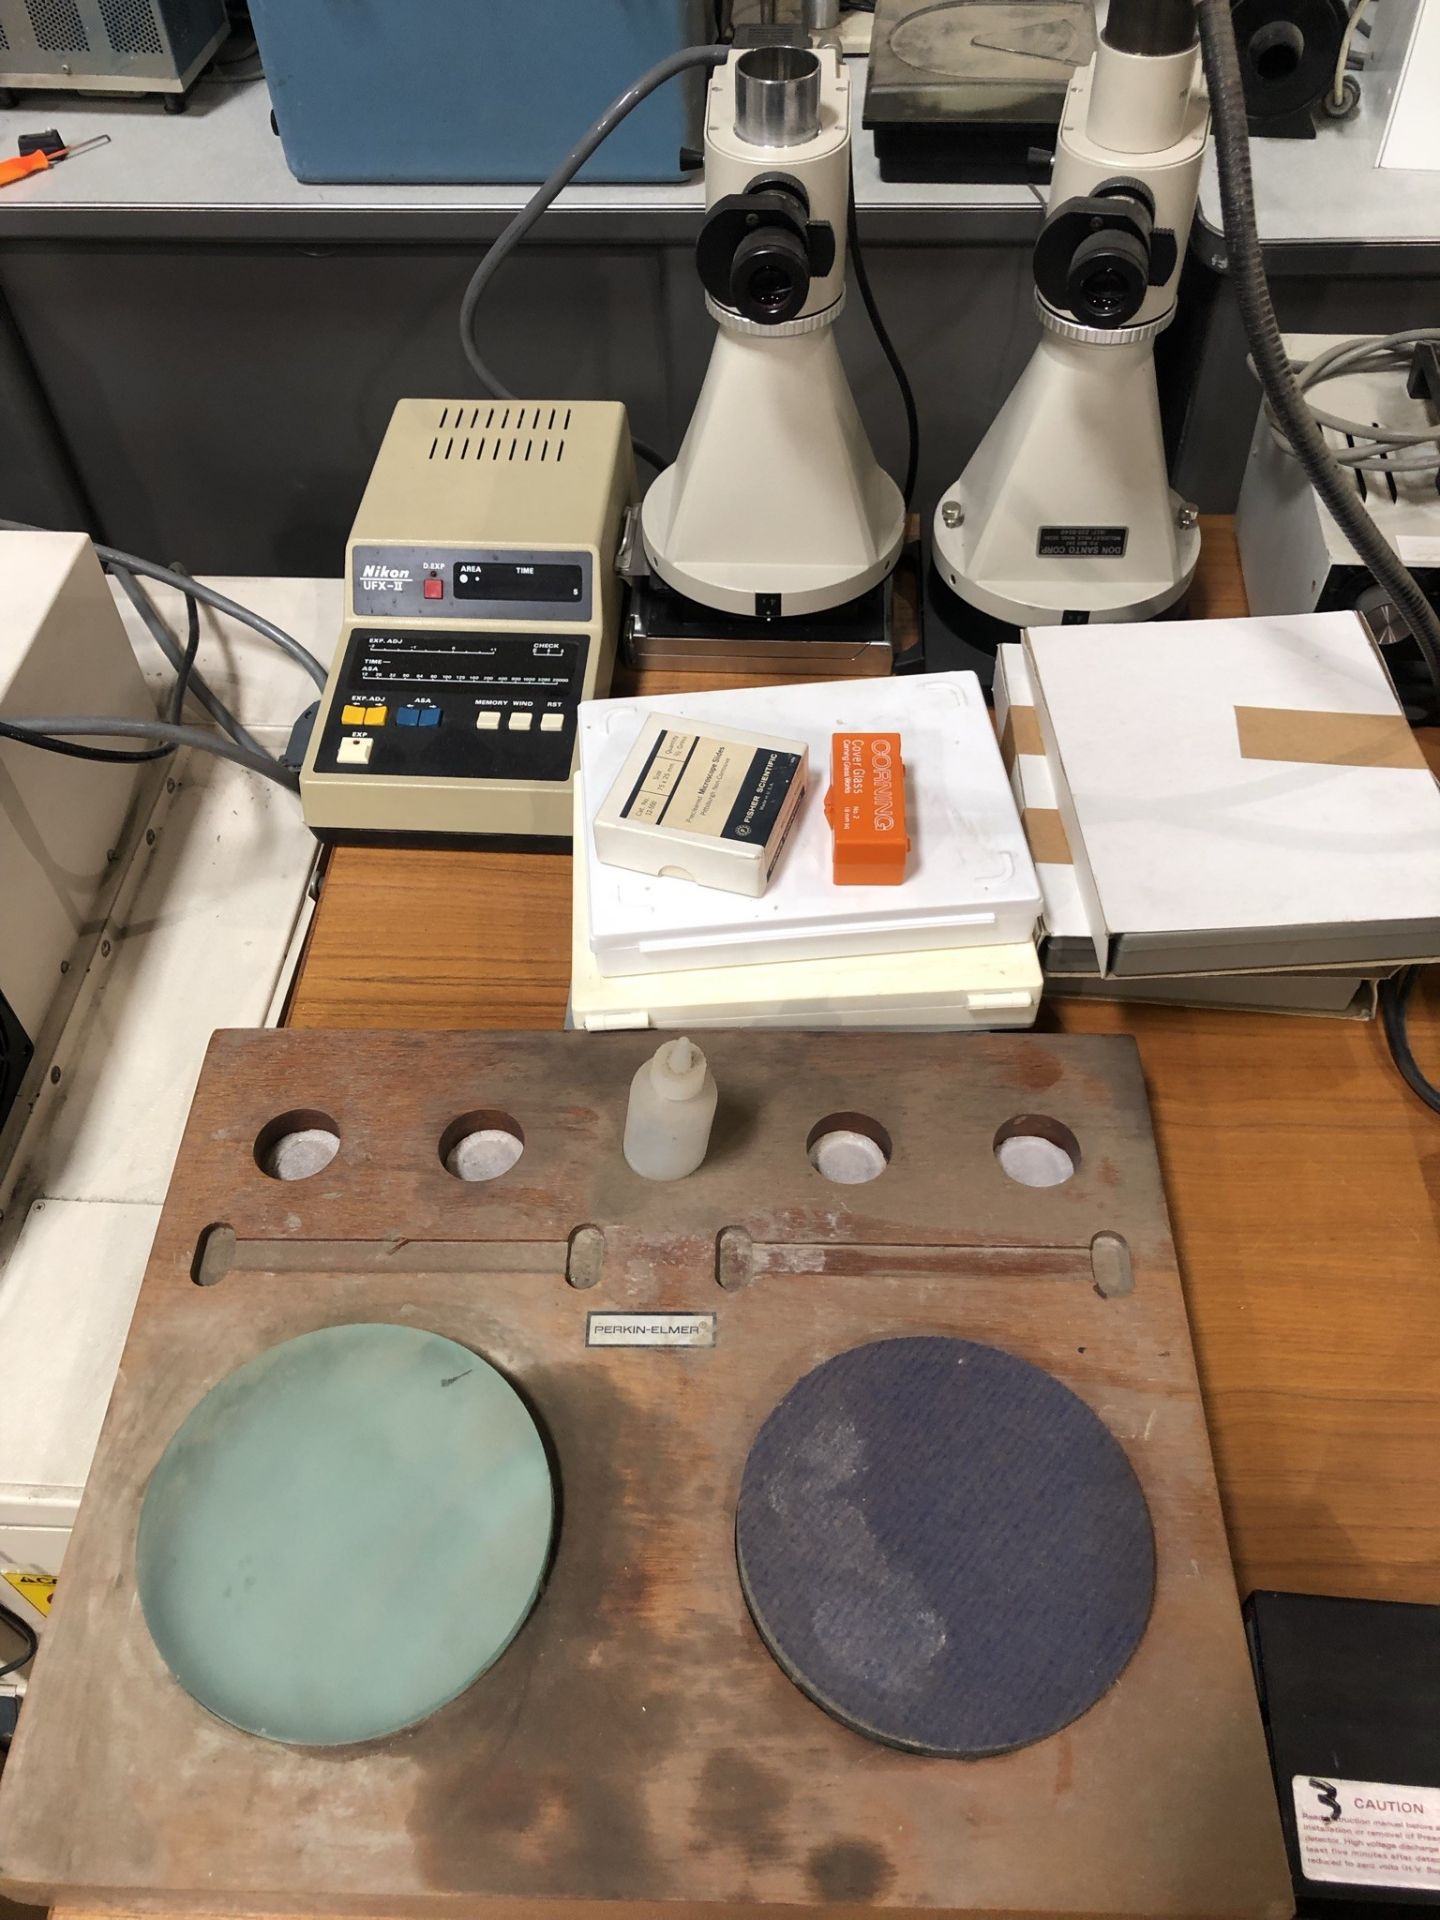 Lot of Misc. Microscopes and optical gauging systems. Lot includes two optical laps, and a nice - Image 2 of 28